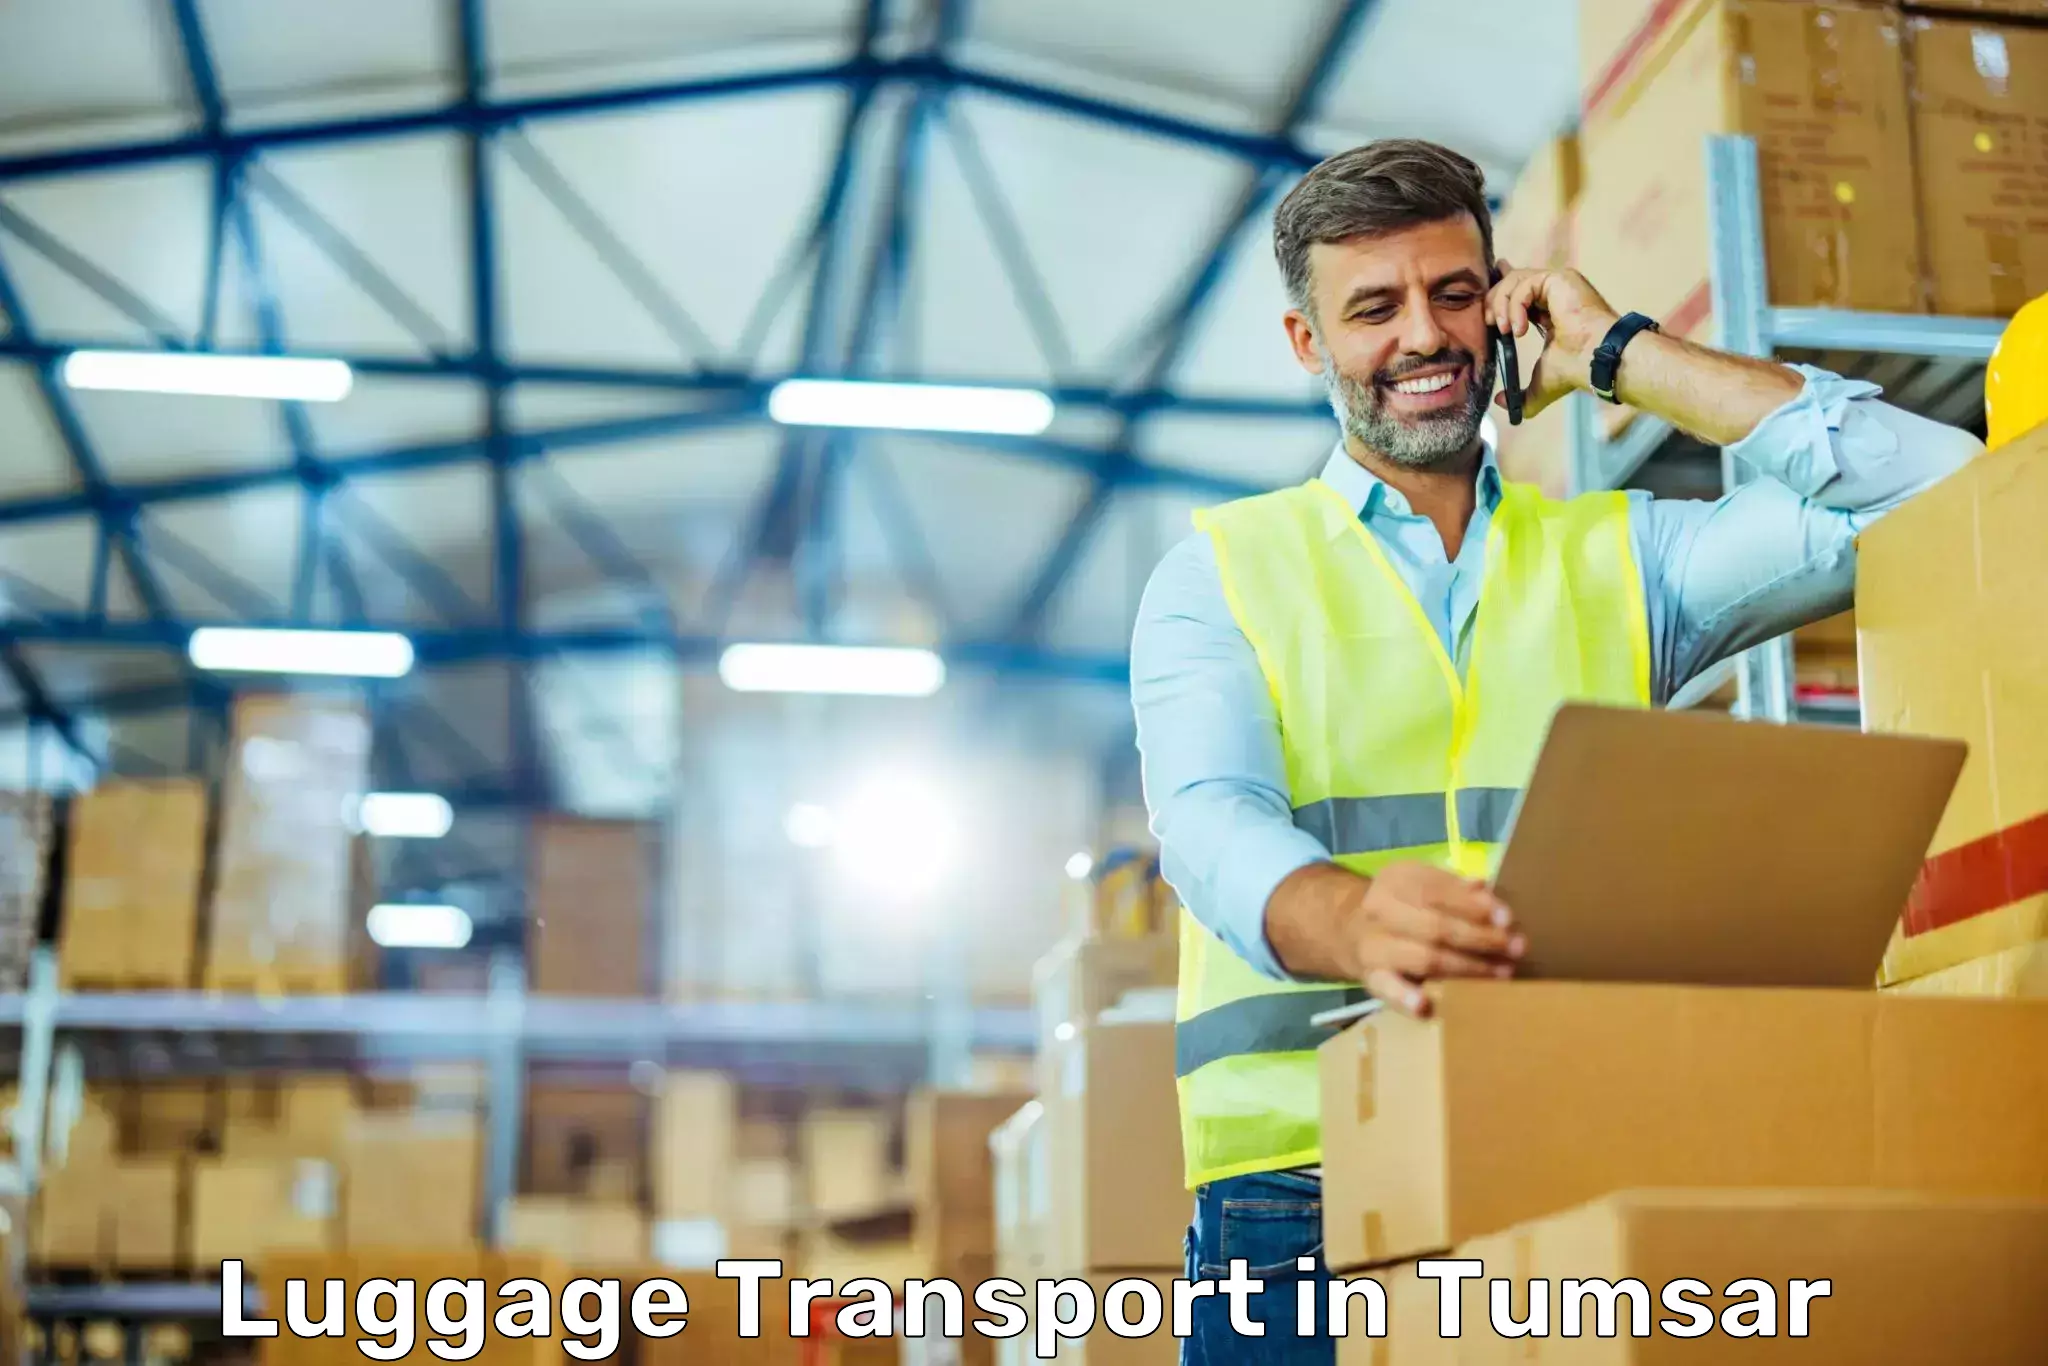 Baggage transport technology in Tumsar